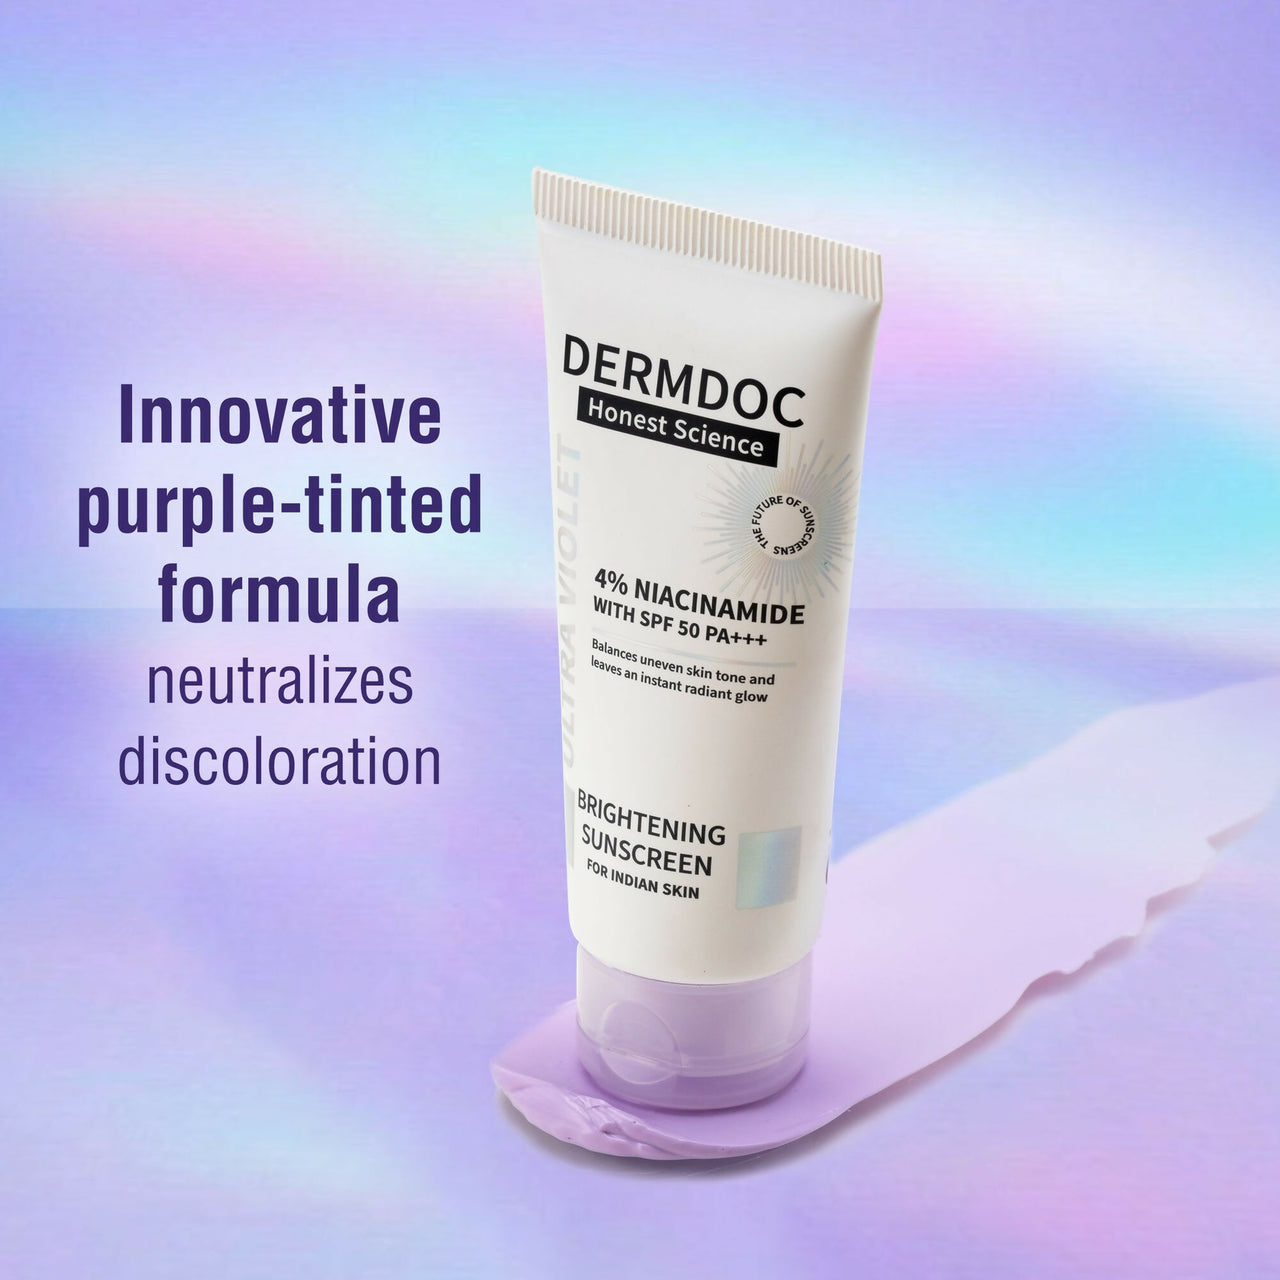 Dermdoc 4% Niacinamide With Spf 50 Pa +++ Brightening Sunscreen - Distacart